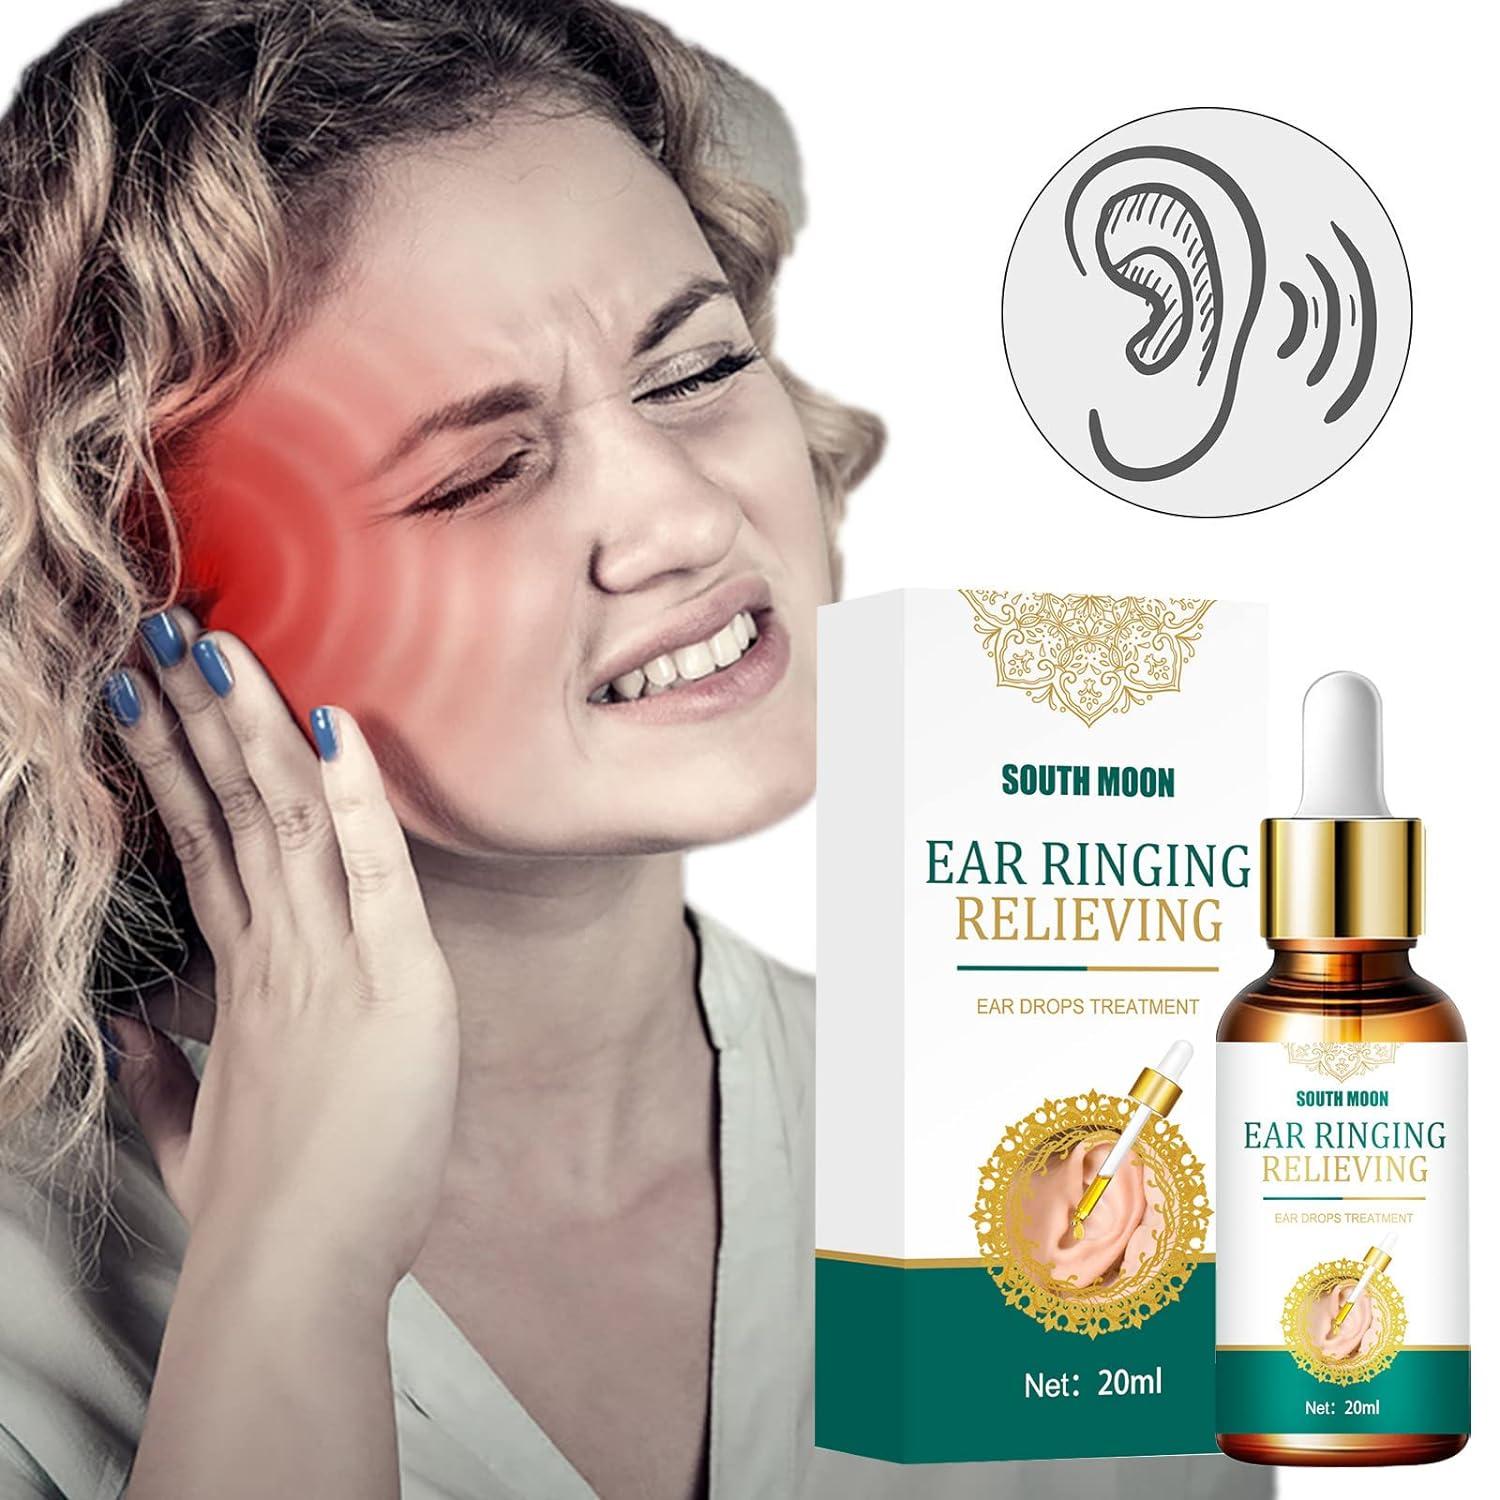 Tinnitus: Symptoms, Causes and Natural Support Strategies